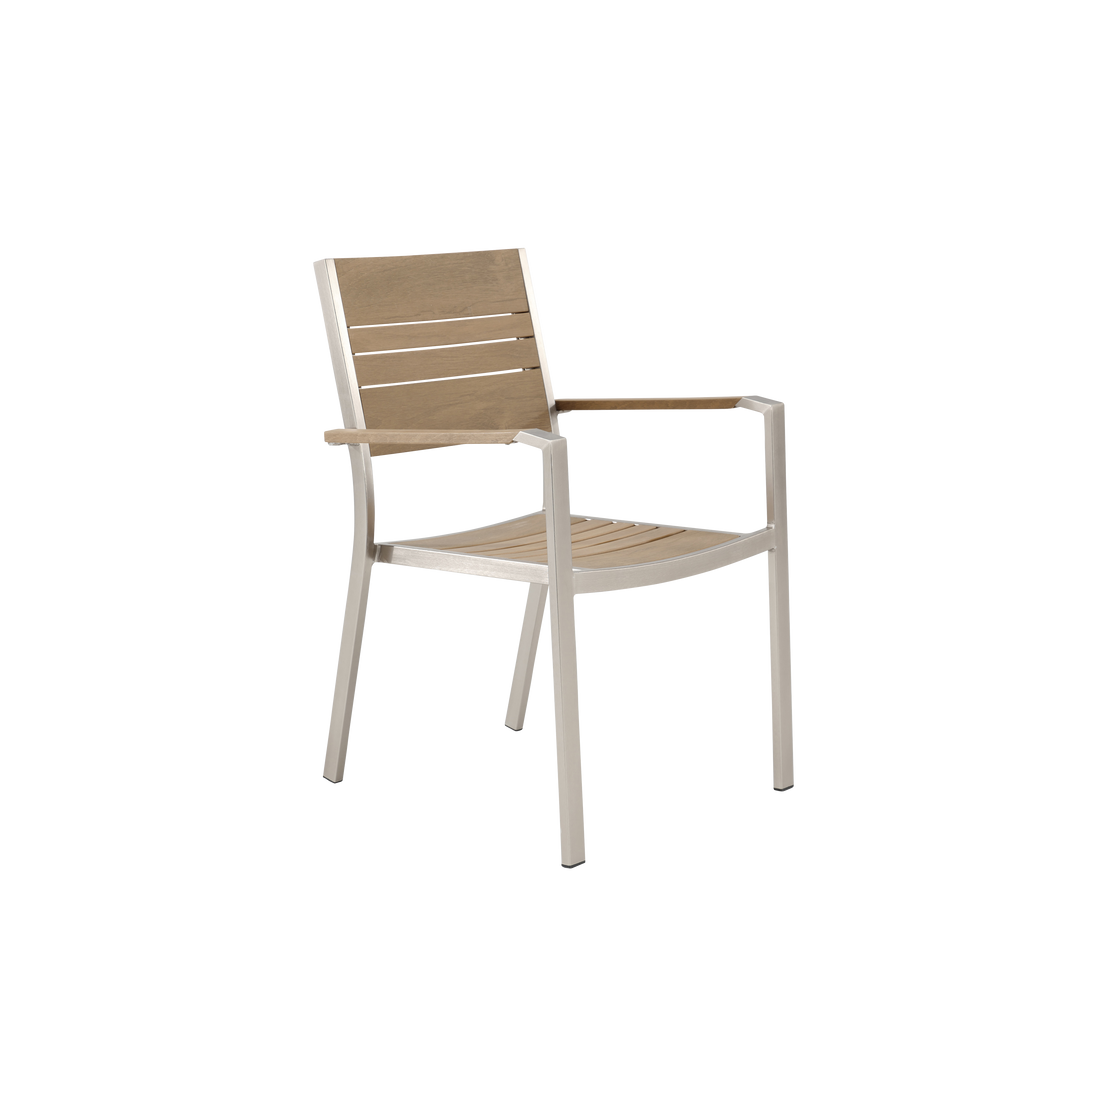 CHAIR WITH ARMRESTS MENORCA NATERIAL 57X55 ALUMINUM POLIWOOD - best price from Maltashopper.com BR500013604